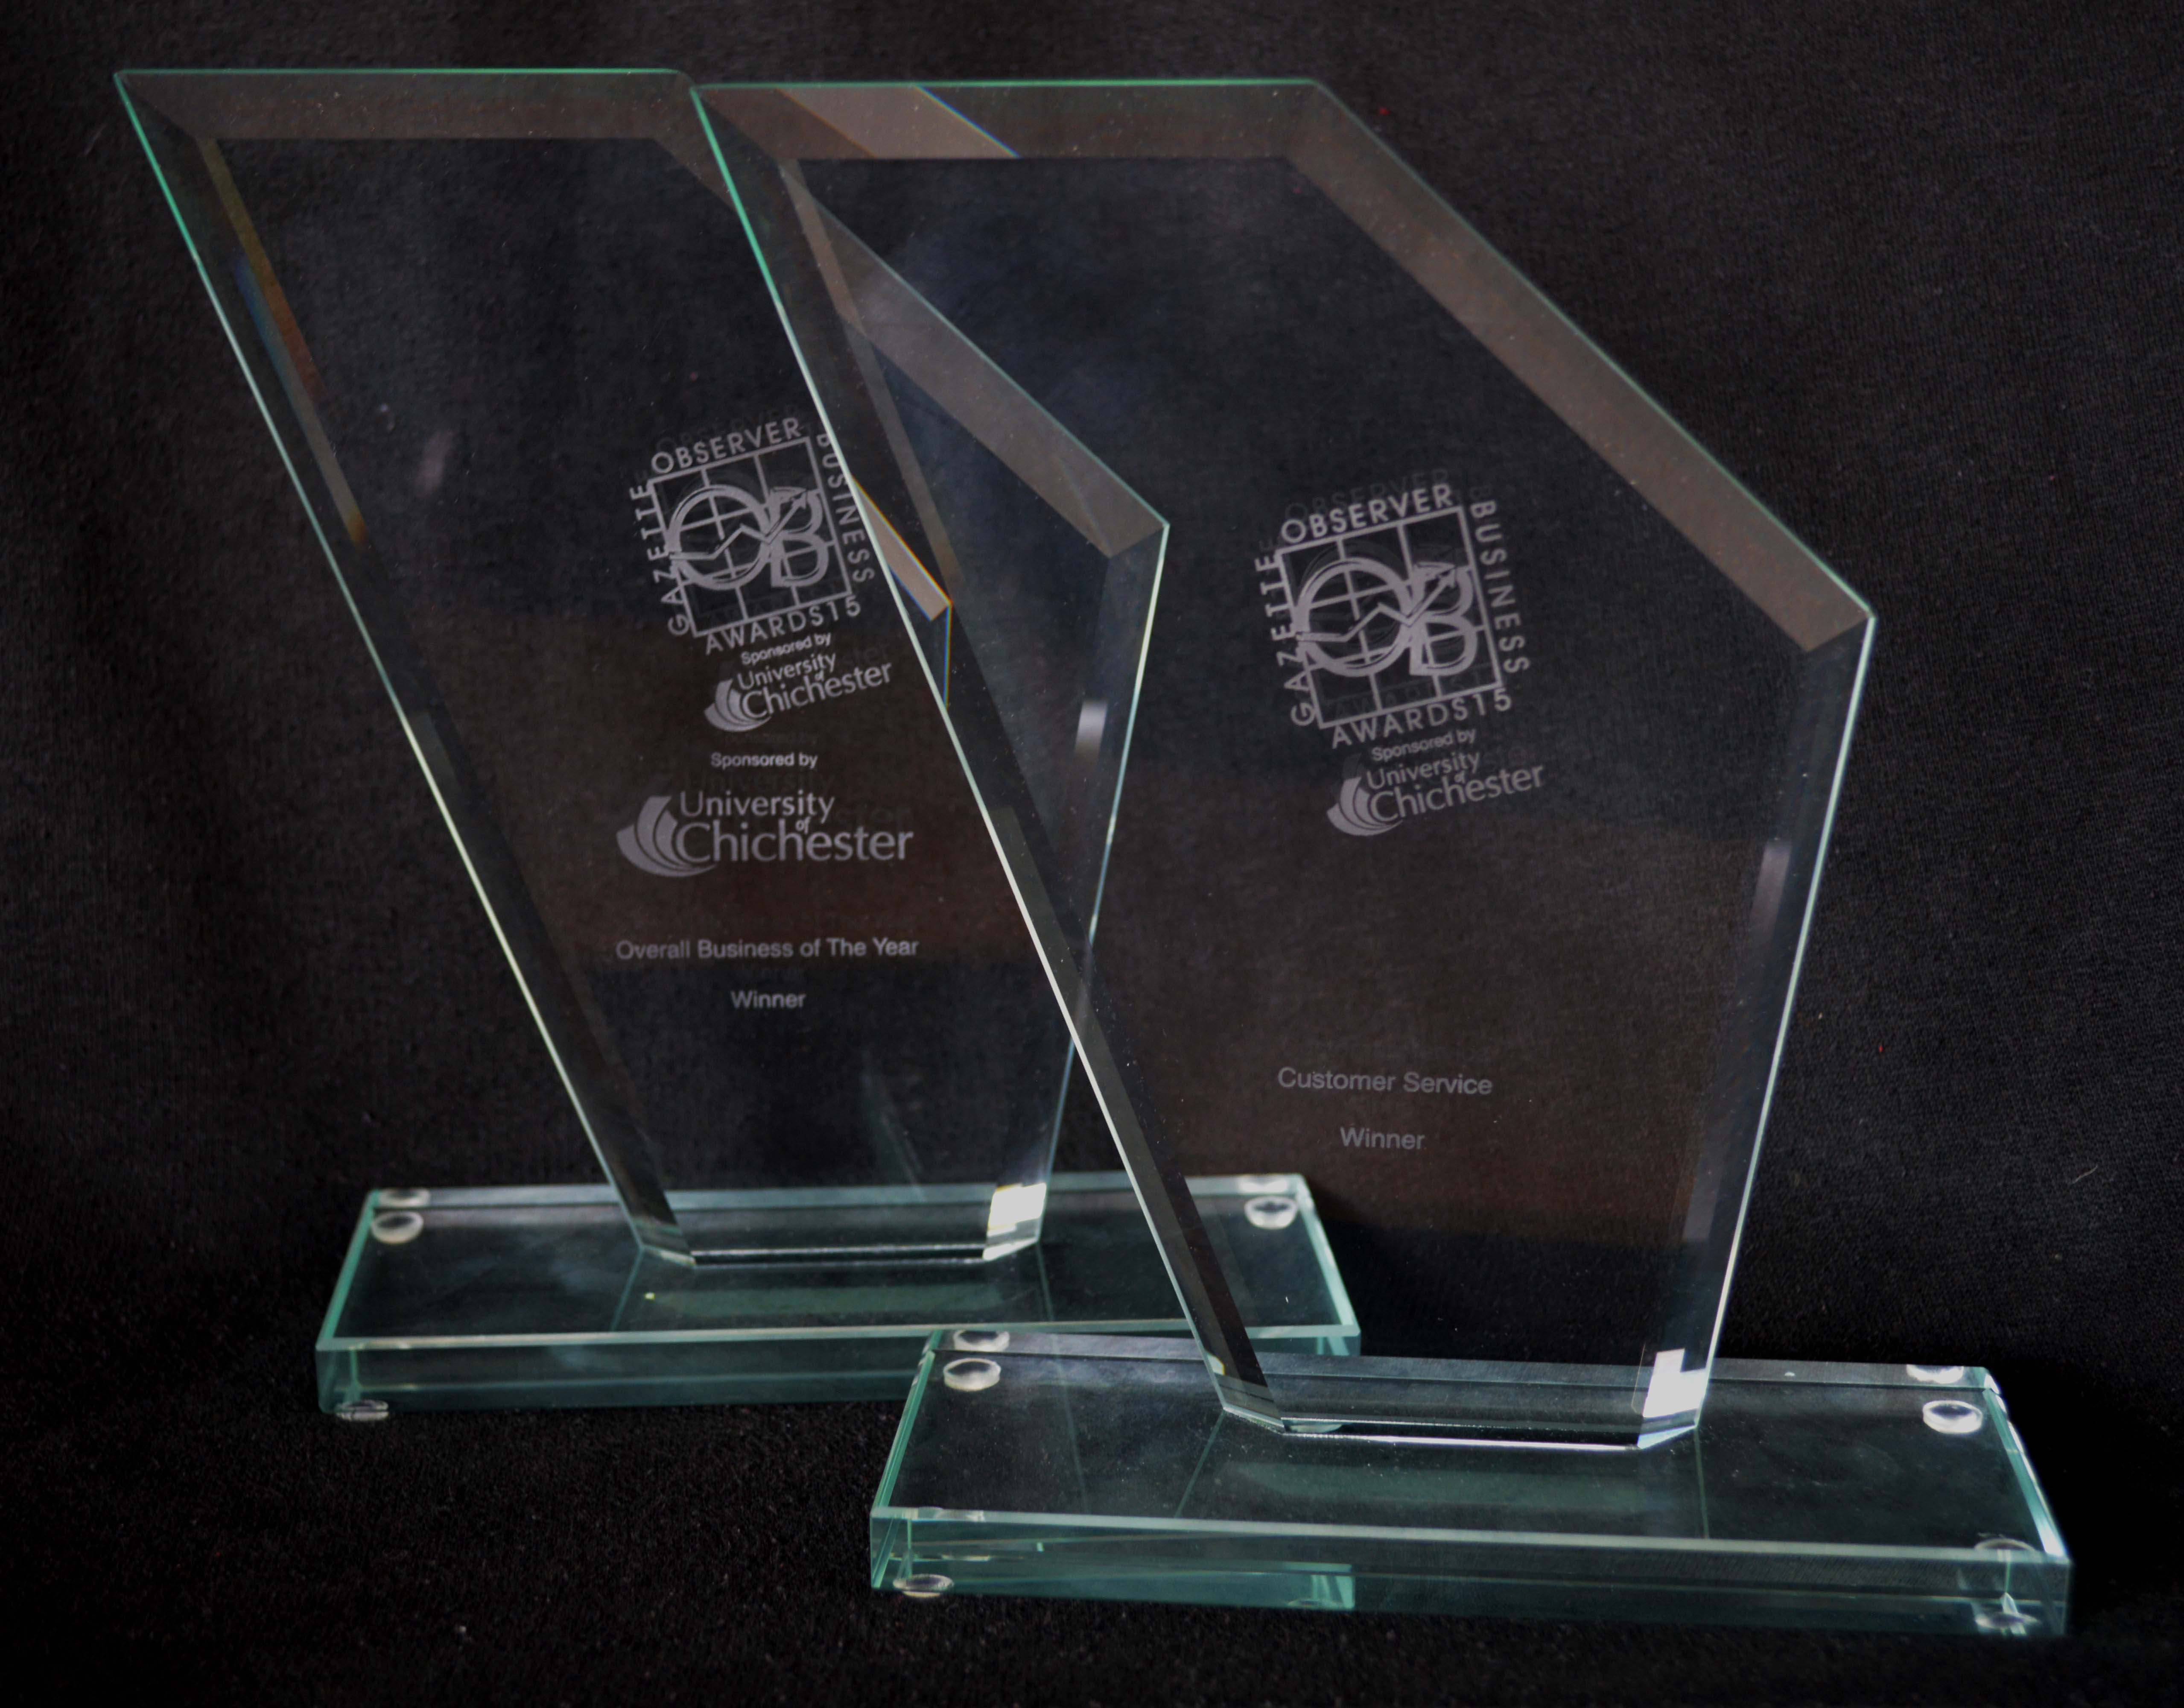 Krowmark Ltd's awards for customer service and business of the year 2015